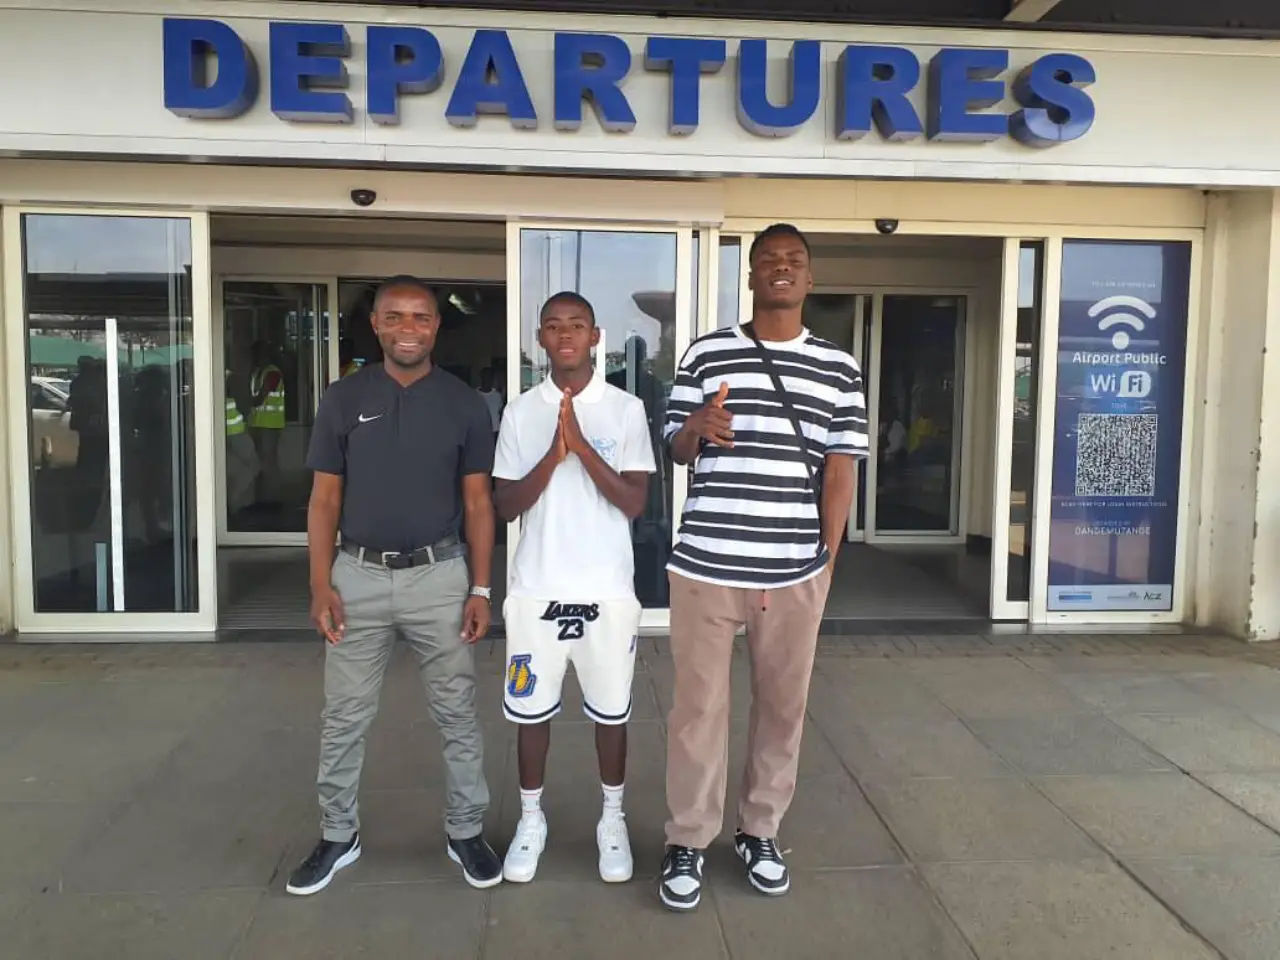 Costa Sports Pro Academy (CSPRO), owned by former Zimbabwe Warriors defender Costa Nhamoinesu, has sent two of its youngsters in Brooklyn Katumba (19) and Takudzwa Darkeni (17) for an educational program in the Czech Republic.